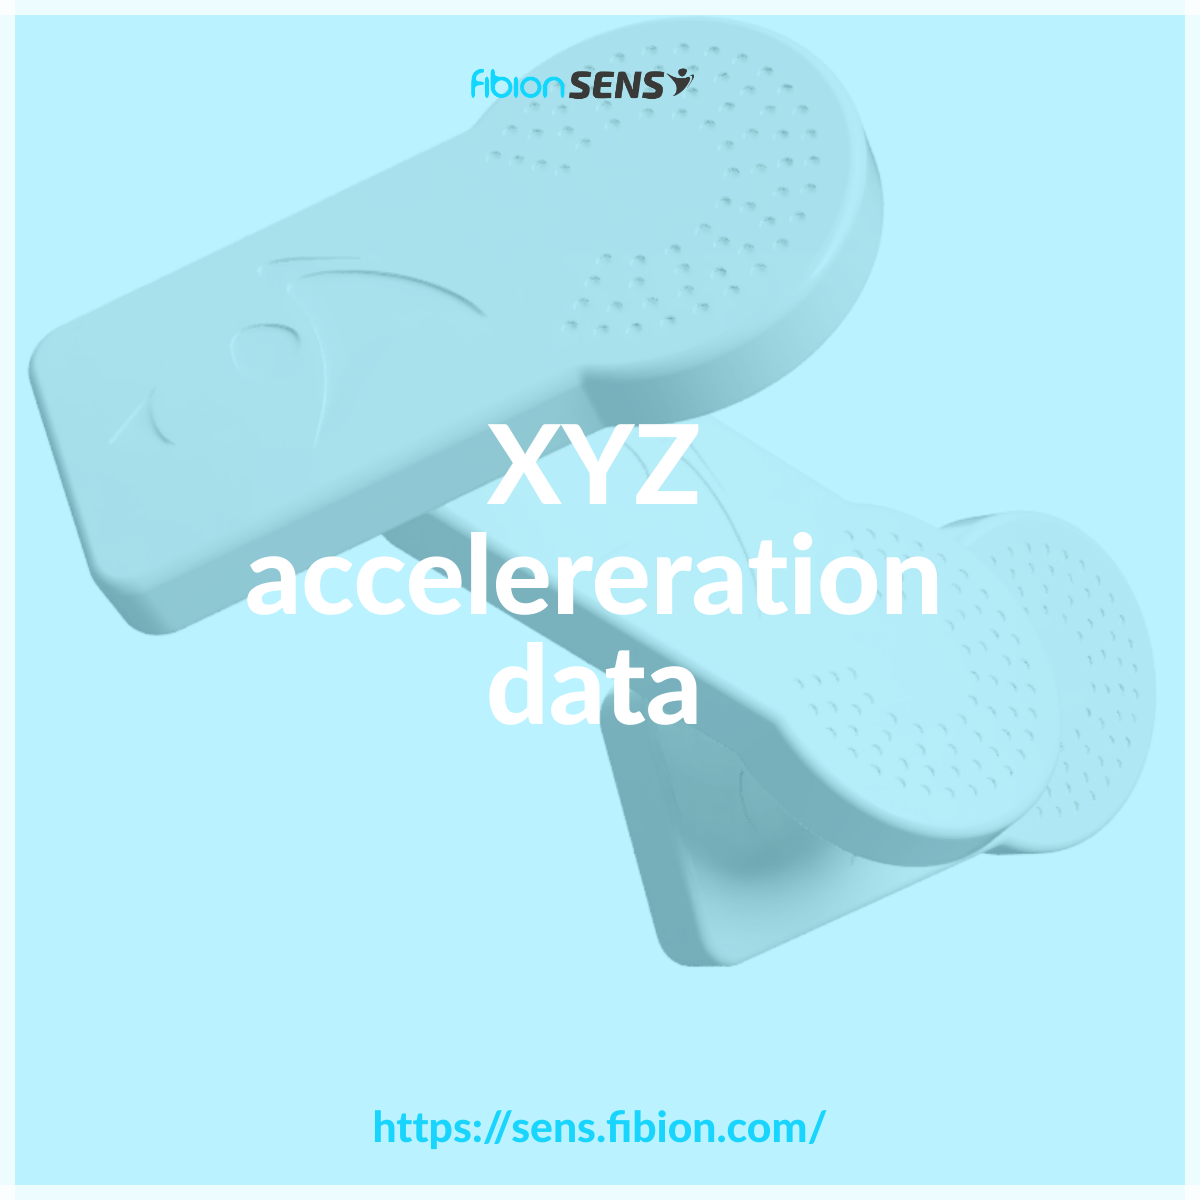 Image of two fibion SENS devices against a light blue background with the text "XYZ accelereration data" and a website URL "https://sens.fibion.com/" at the bottom.